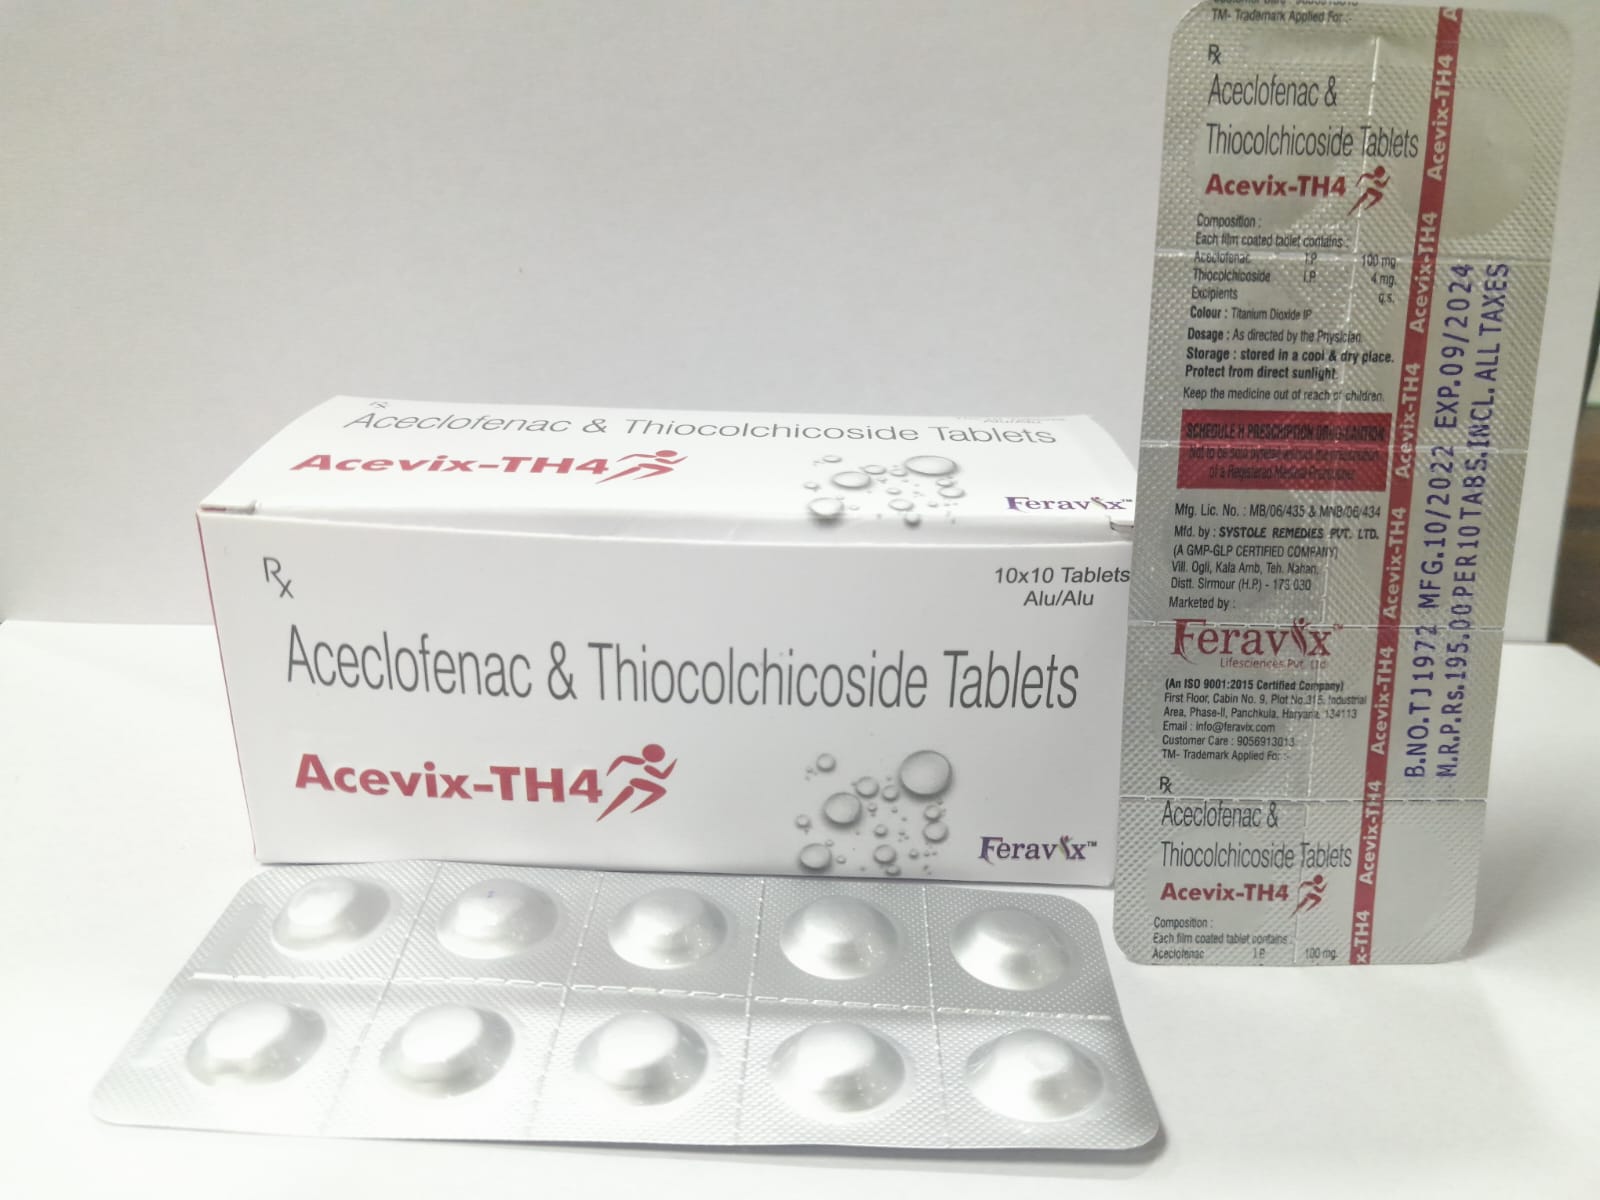 Product Name: ACEVIX TH4 Tablets, Compositions of ACEVIX TH4 Tablets are ACECLOFANAC 100MG, THIOCOLCHICOSIDE 4MG - Feravix Lifesciences